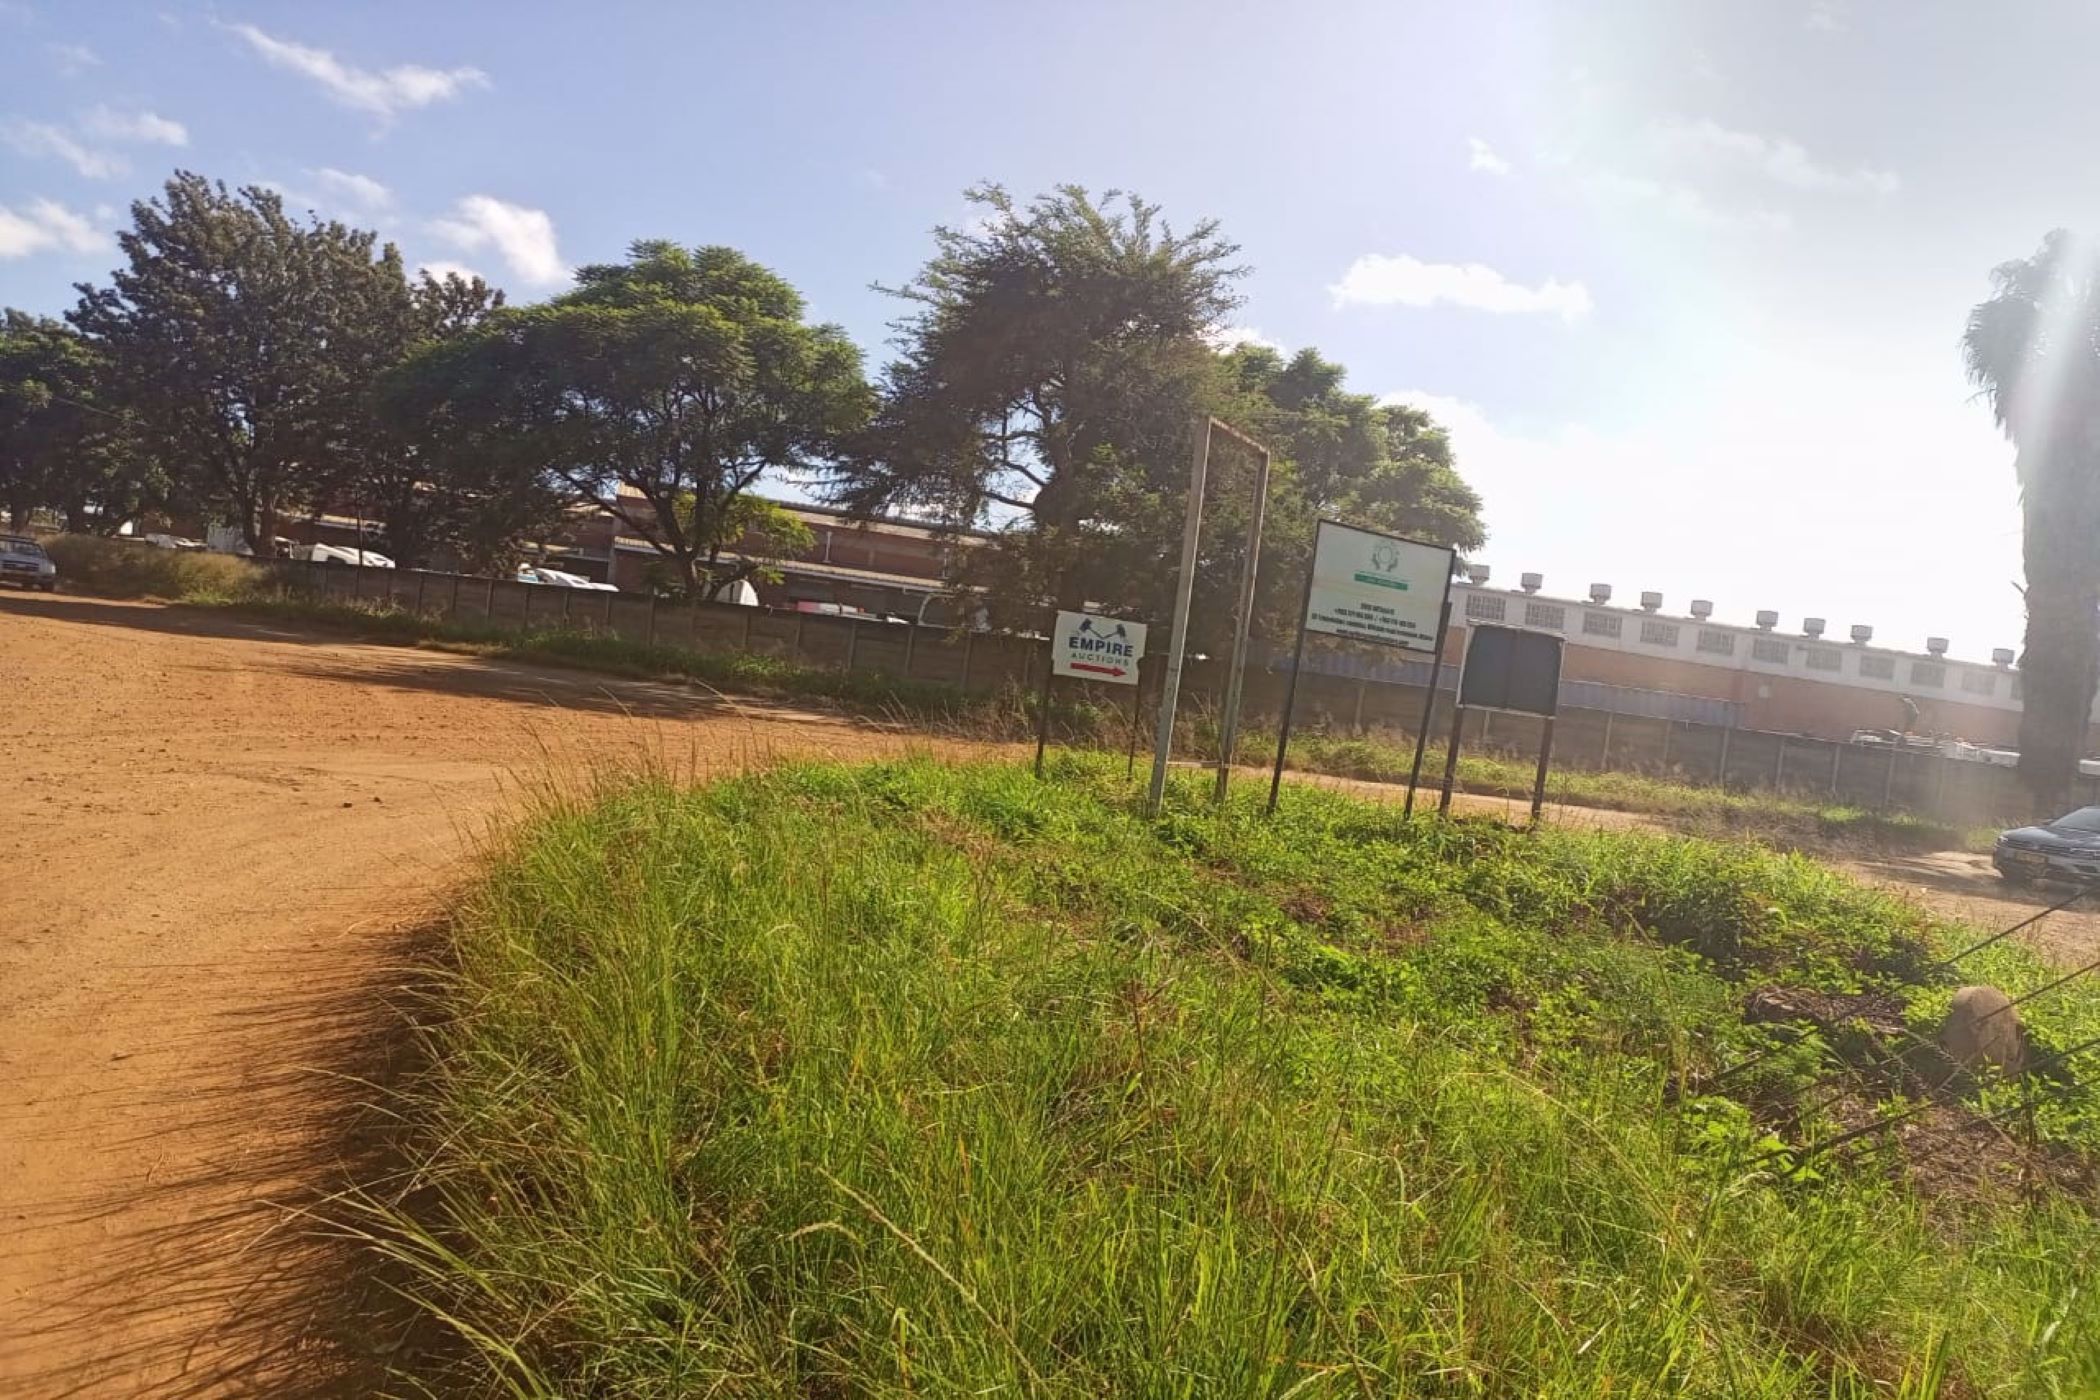 1.87 hectare vacant land for sale in Hillside (Harare South, Zimbabwe)